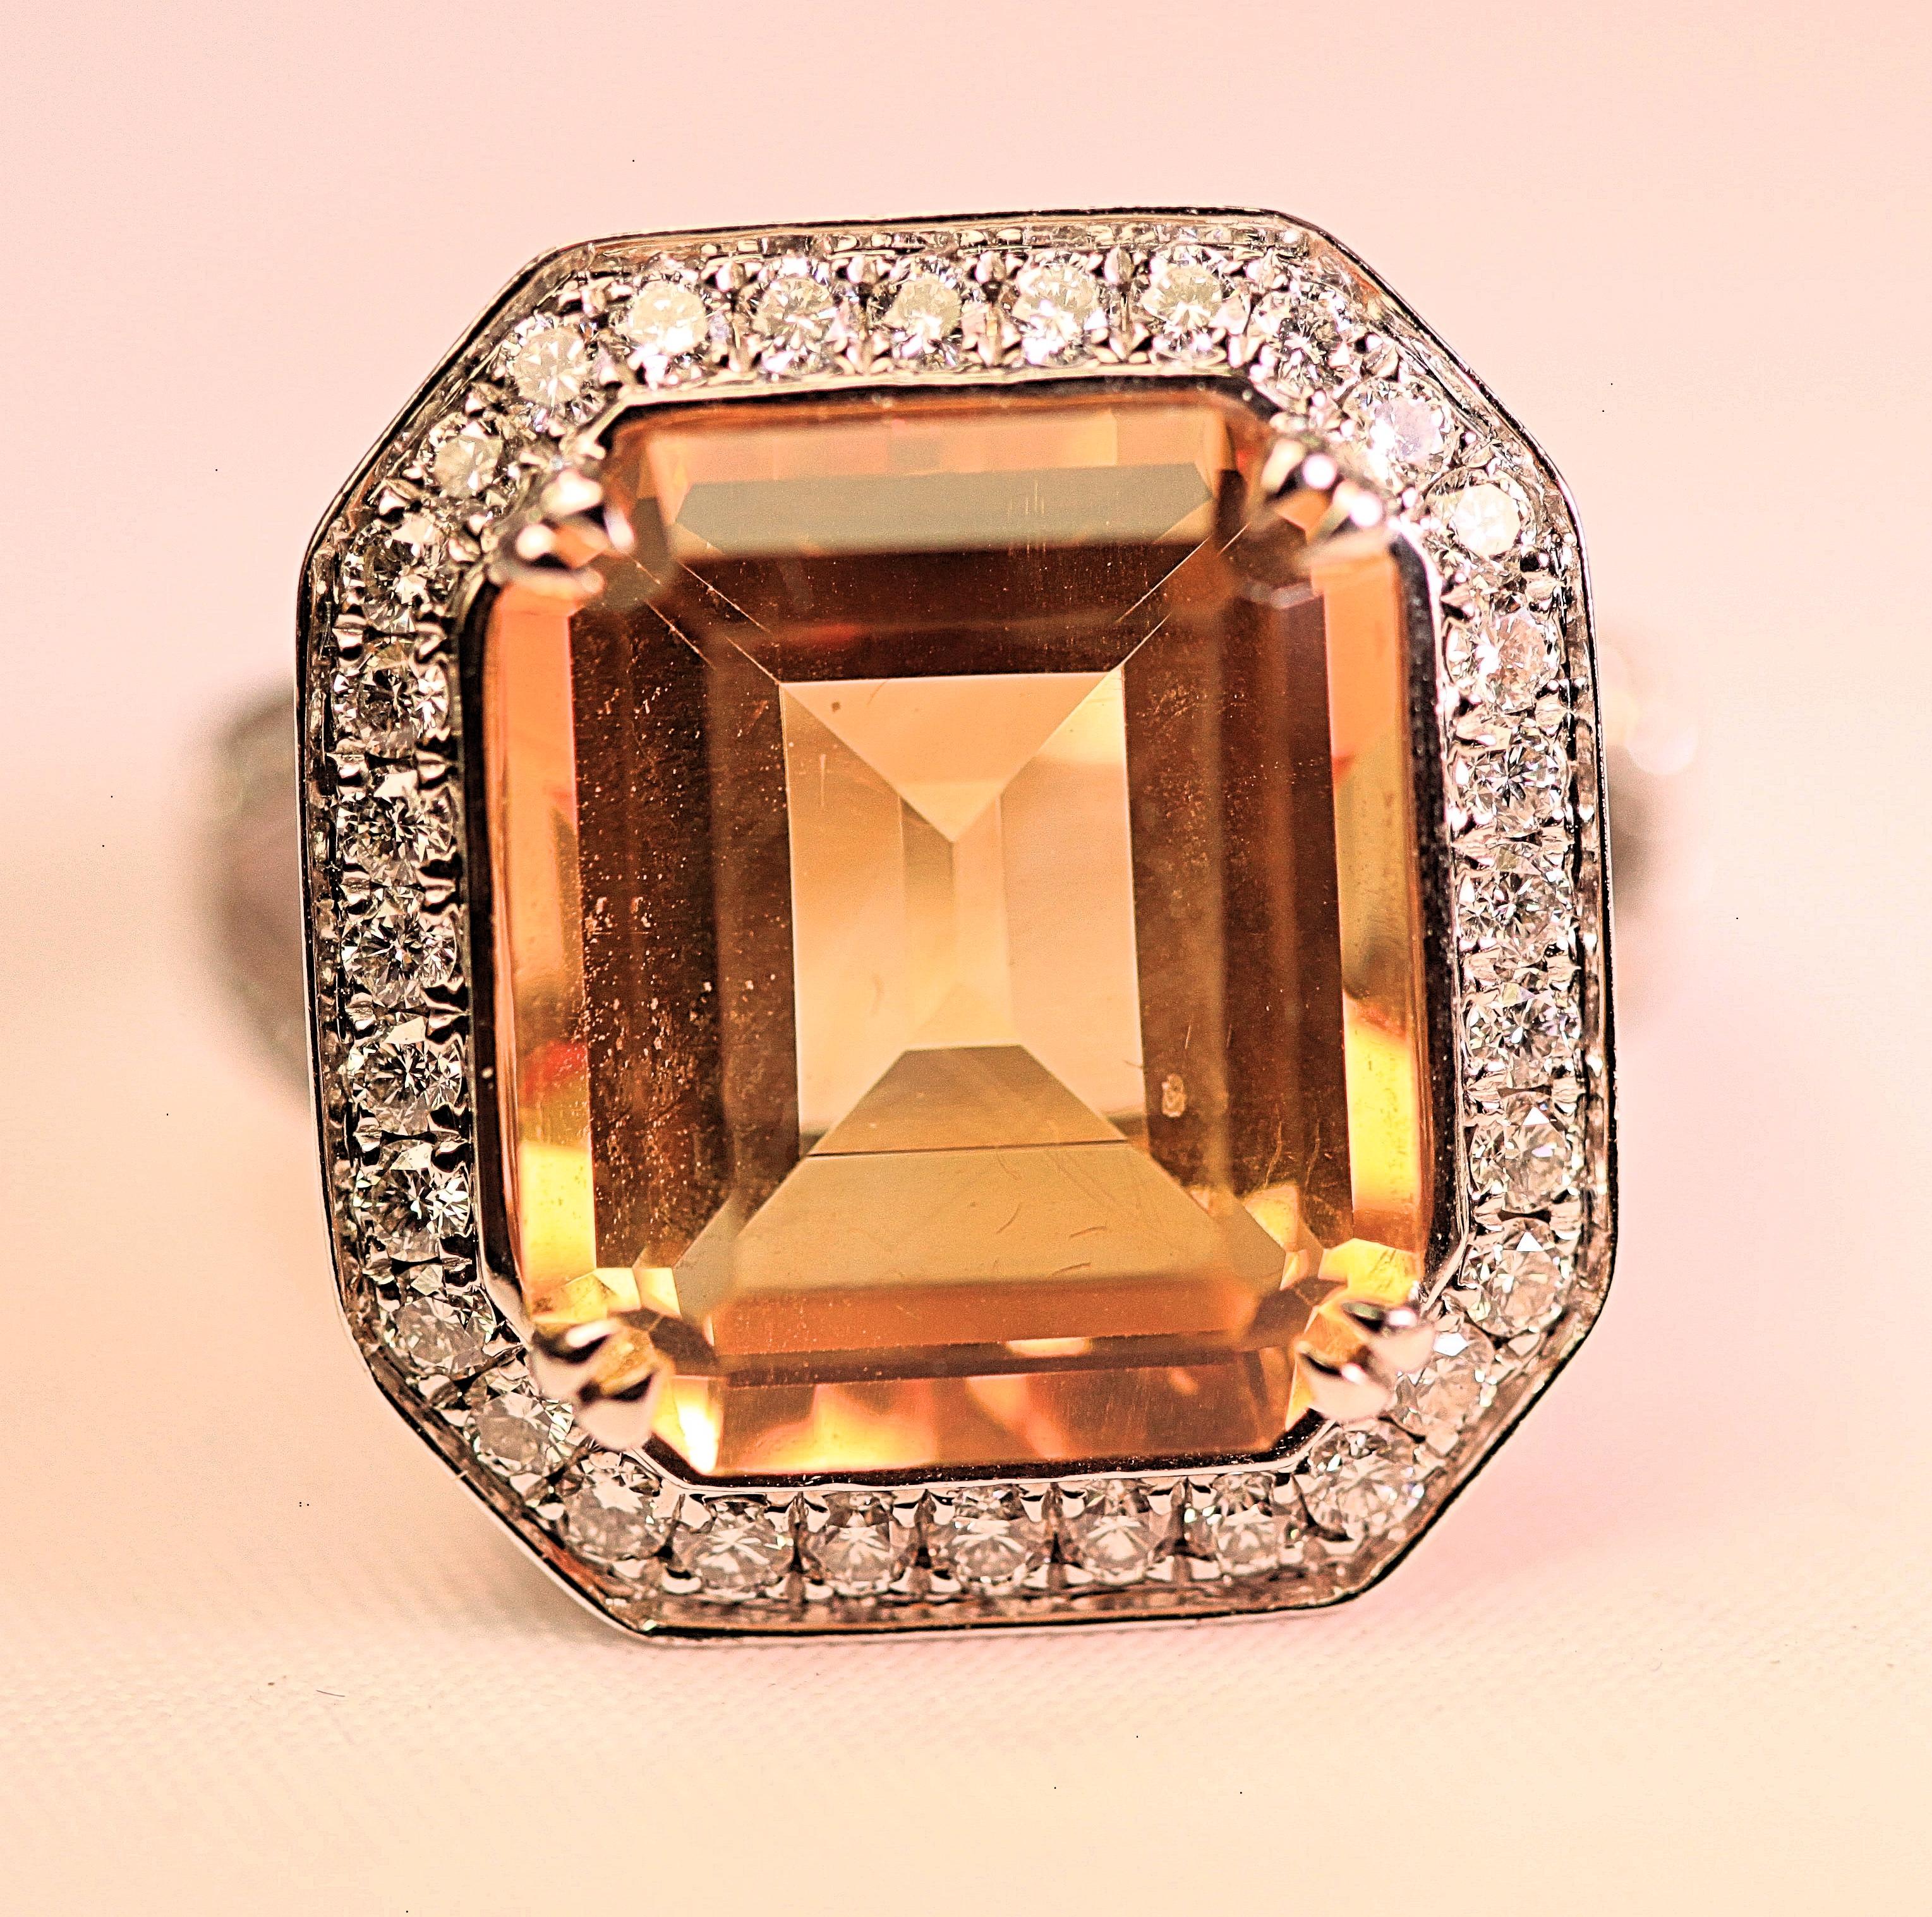 A beautiful citrine and diamond ring that is 18K white gold .  The citrine is a step-cut design that is surrounded by white diamonds. The citrine is 9.56 carats total weight. The citrine measures 14mm by 11mm. The diamonds are 1.08 carats total